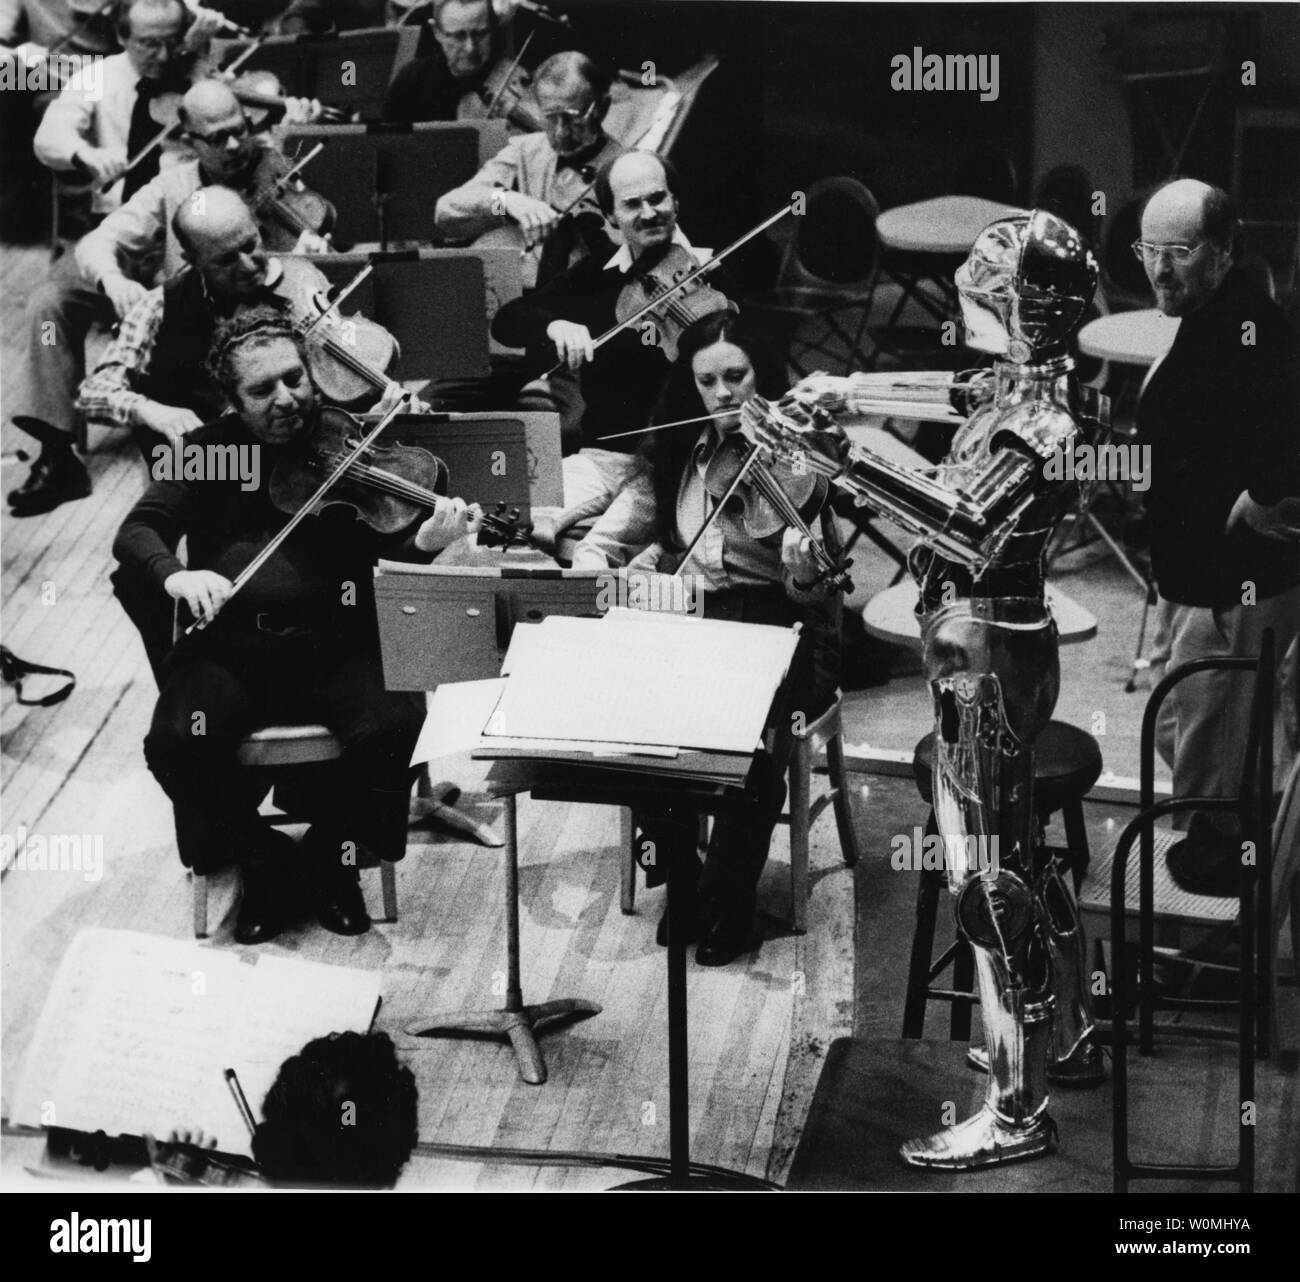 May 4th is the unofficial holiday established by Star Wars fans to celebrate the culture established by the landmark films. Based on the popular quote from the films, 'May the force be with you', fans commonly say 'May the fourth be with you' on this day. In this UPI file photo, John Williams (R), watches C-3PO, a human-shaped, protocol droid, take a hand at conducting the Boston Pops during rehearsal. Williams wrote the score for all six Star Wars films. UPI/Files Stock Photo